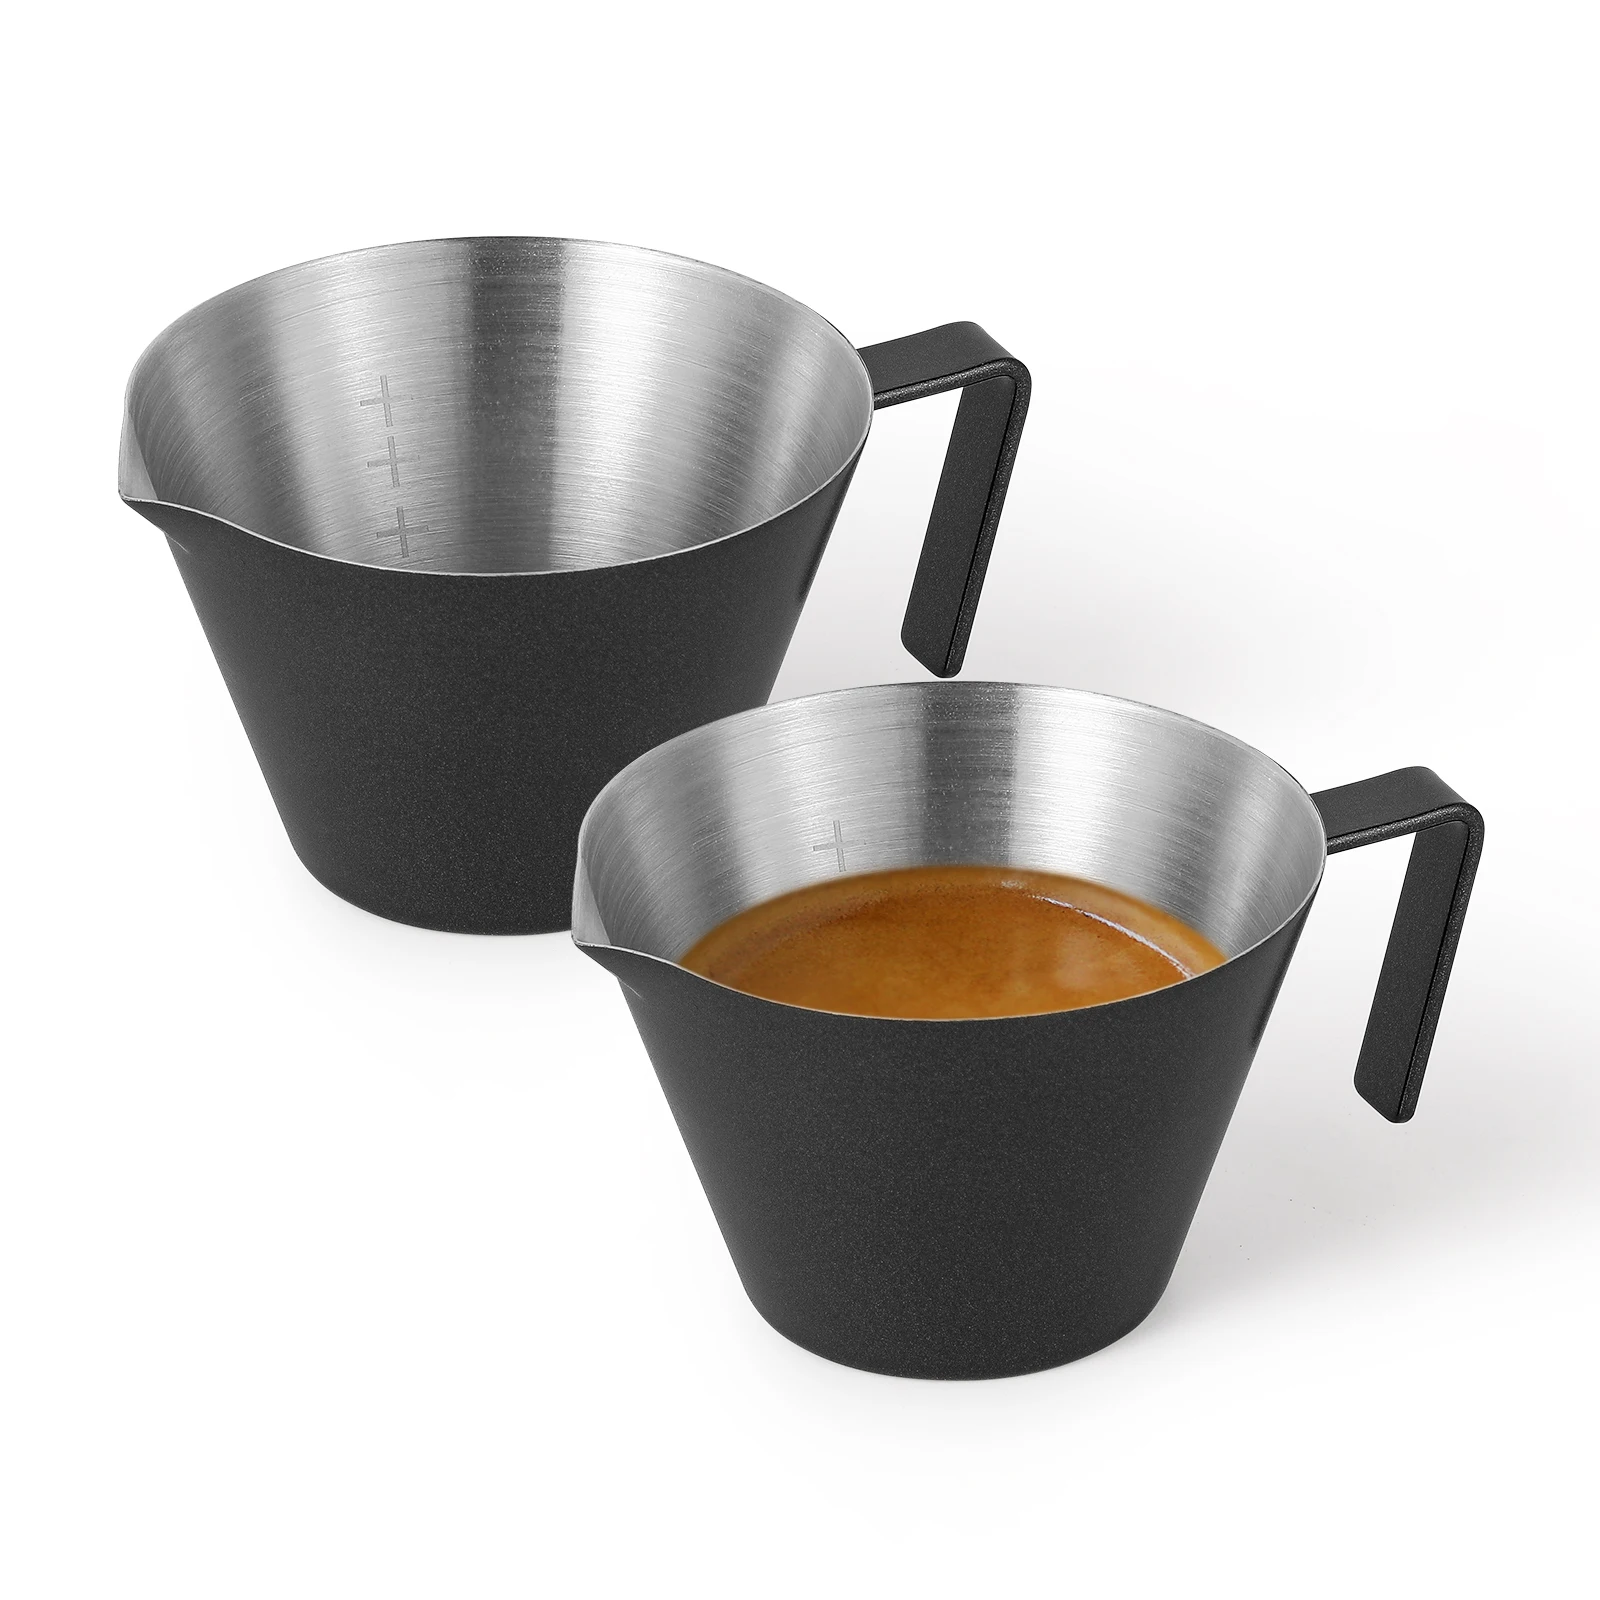 https://ae01.alicdn.com/kf/S48412cc9a15f40a1ac0cdad2d34c218ew/Espresso-Shot-Cups-with-Handle-Espresso-Measuring-Cup-Dishwasher-Safe-2-3-Pack-Stainless-Steel-Pouring.jpg